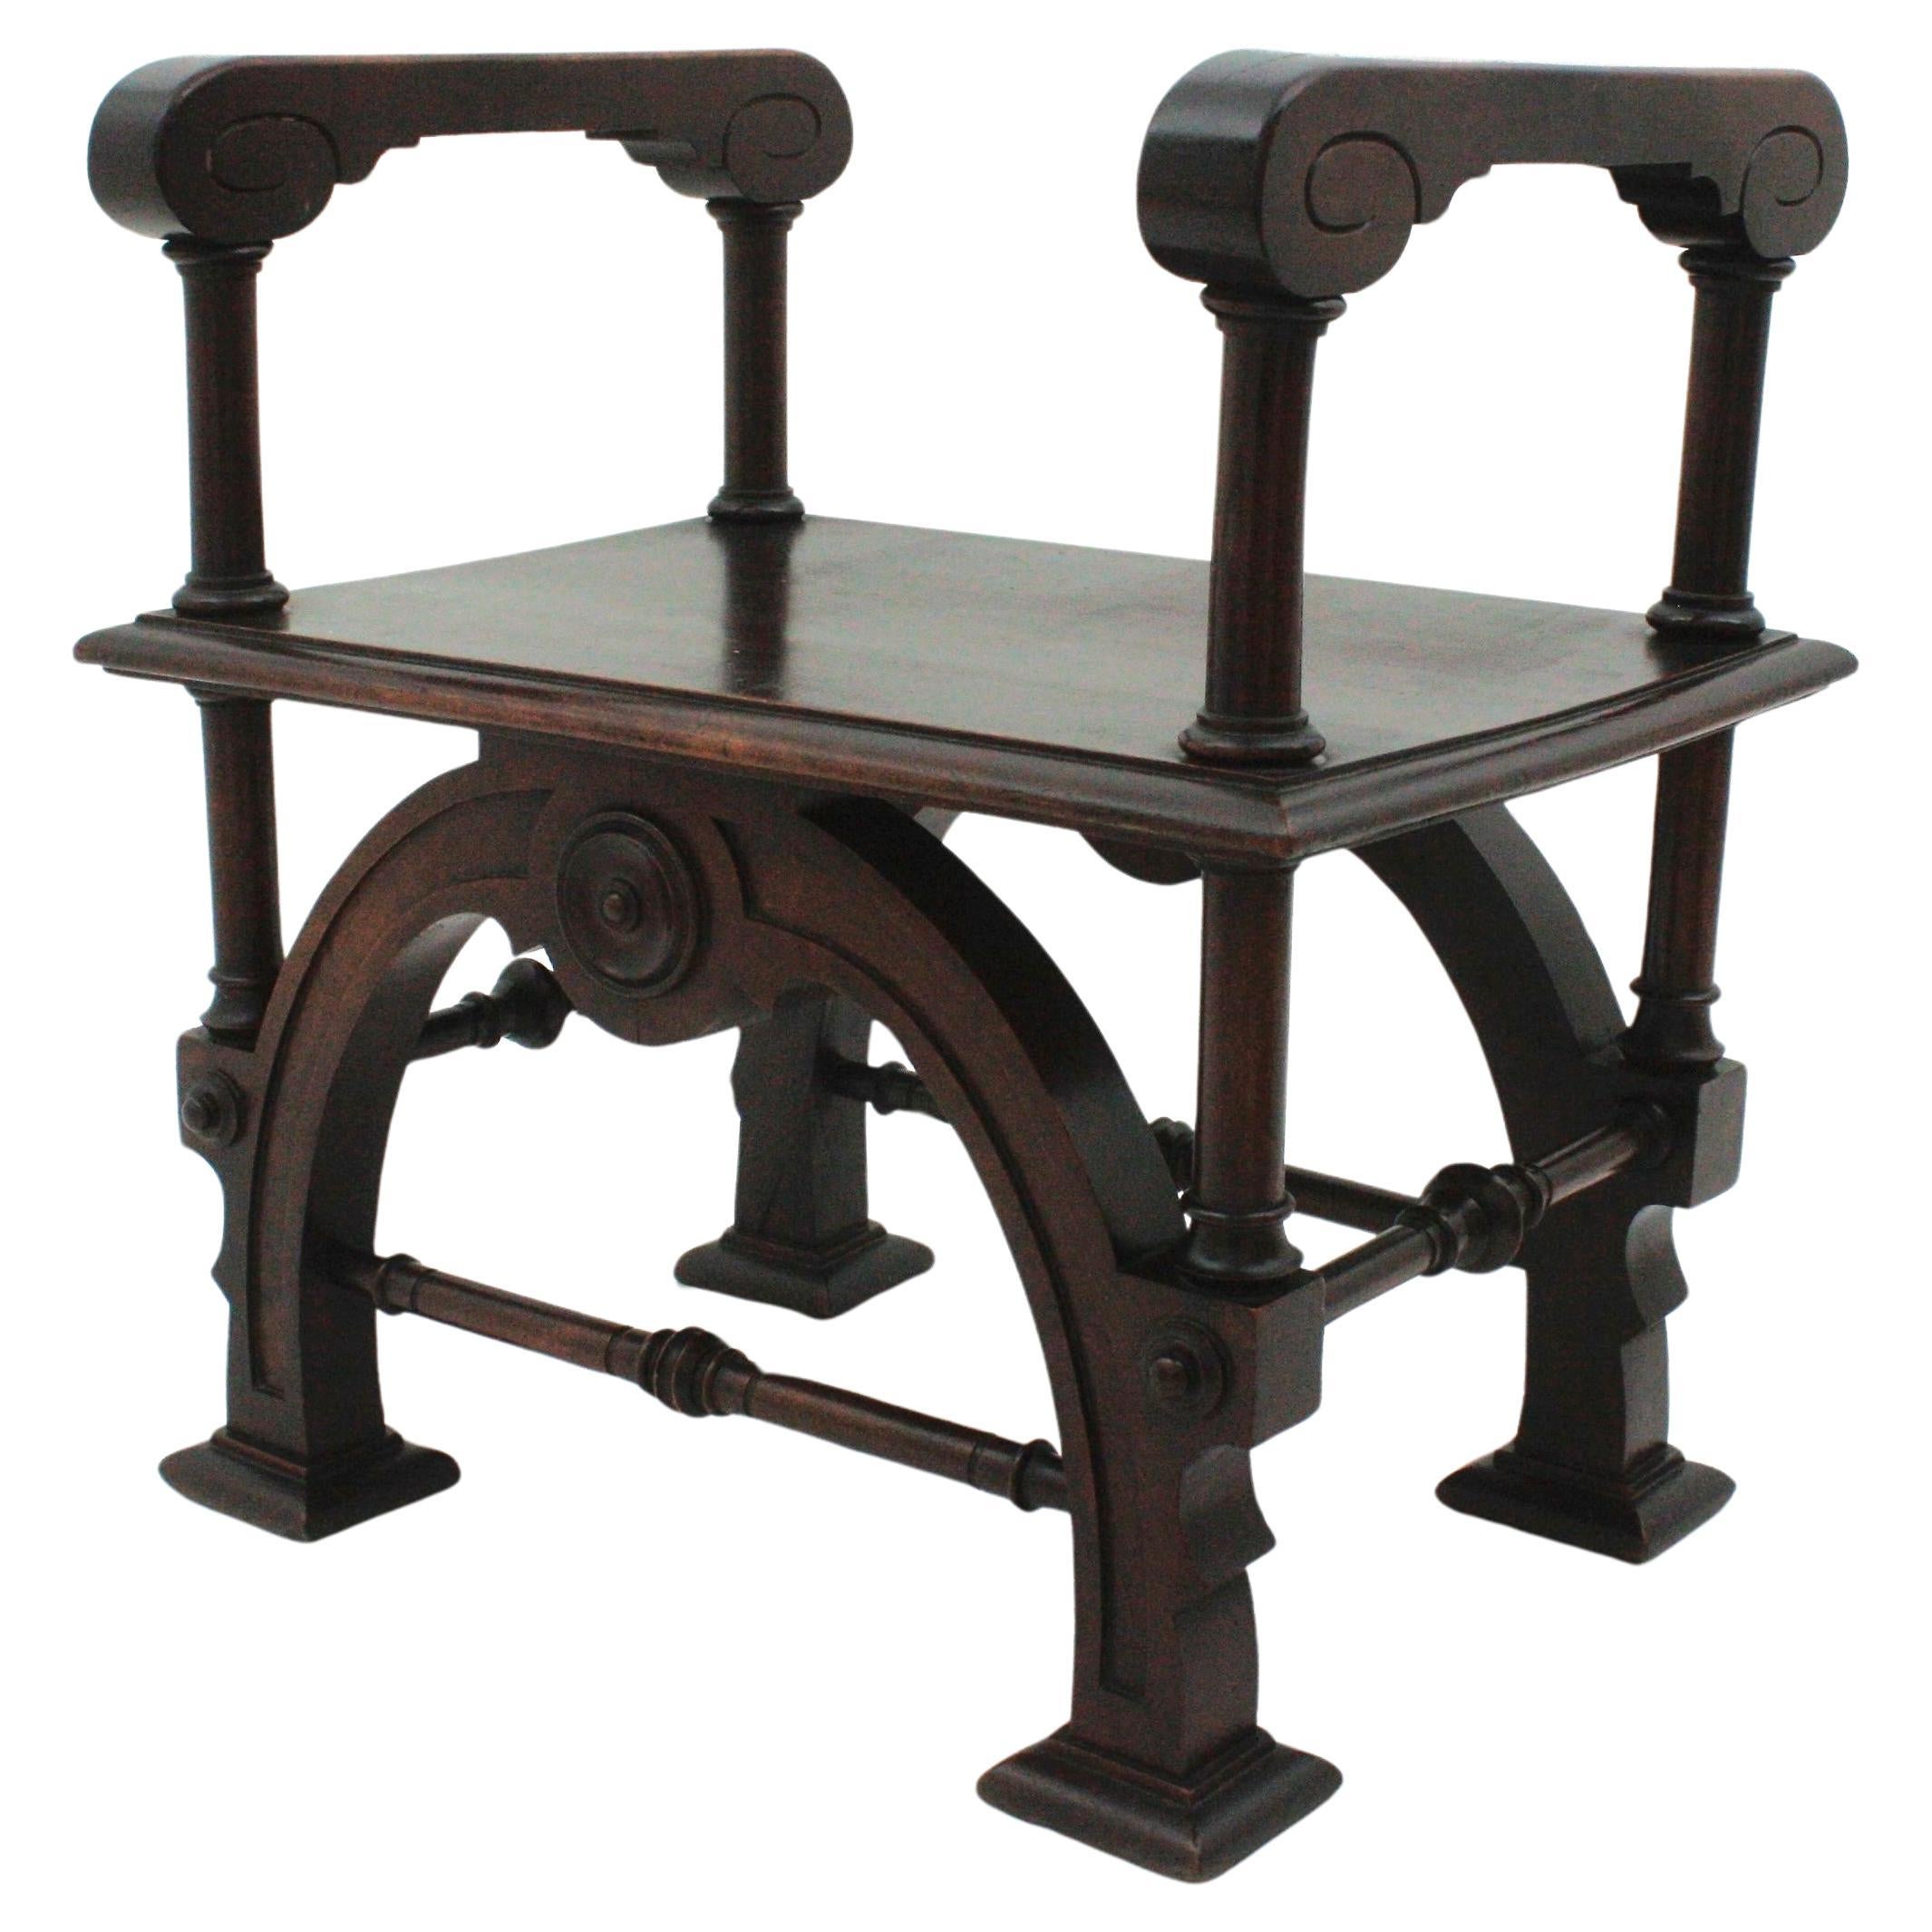 Spanish Revival Carved Stool or Bench in Walnut, 1940s For Sale